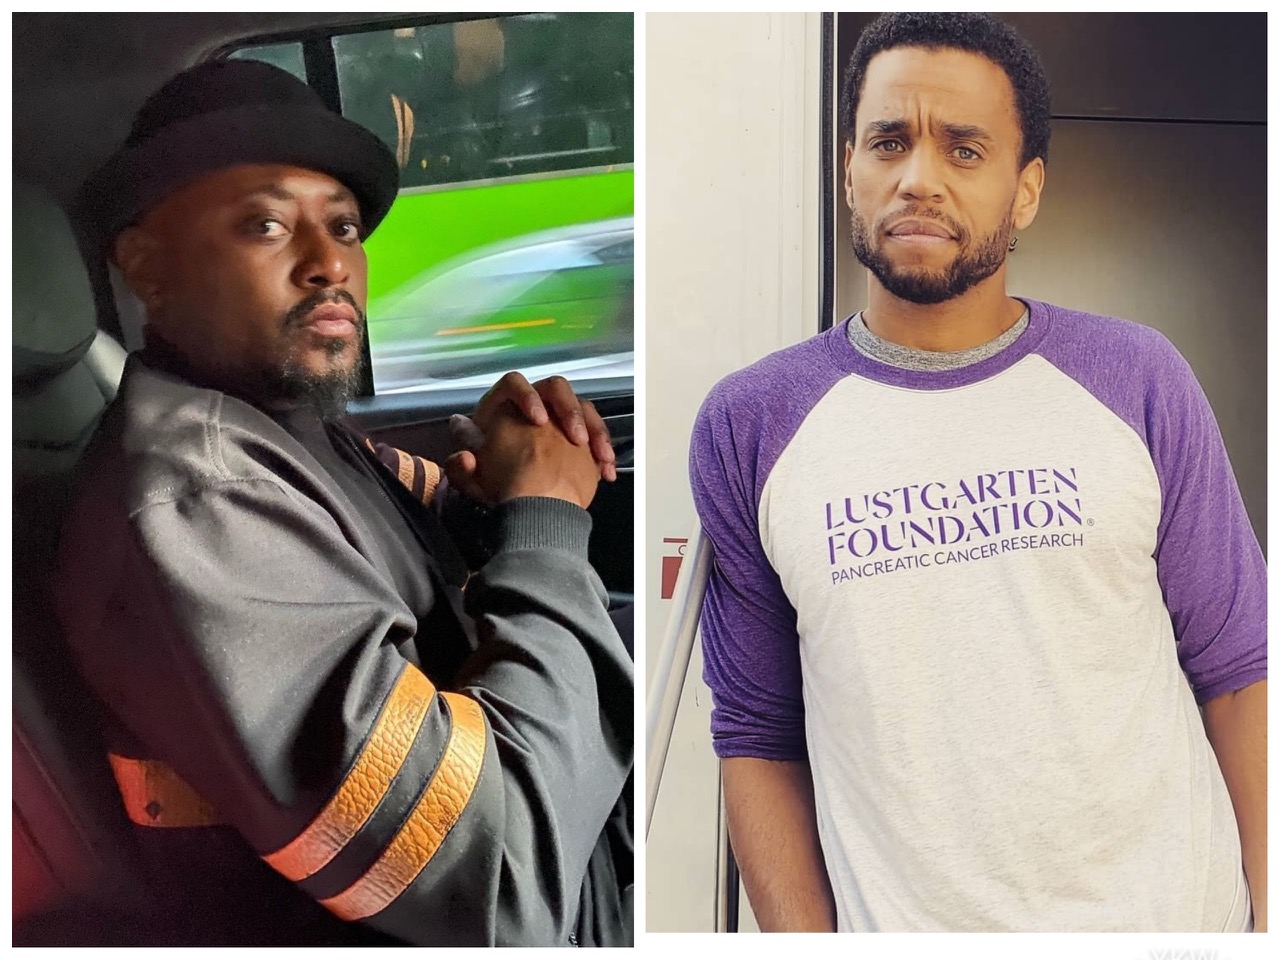 Omar Epps And Michael Ealy Star In Upcoming Movie “The Devil You Know”